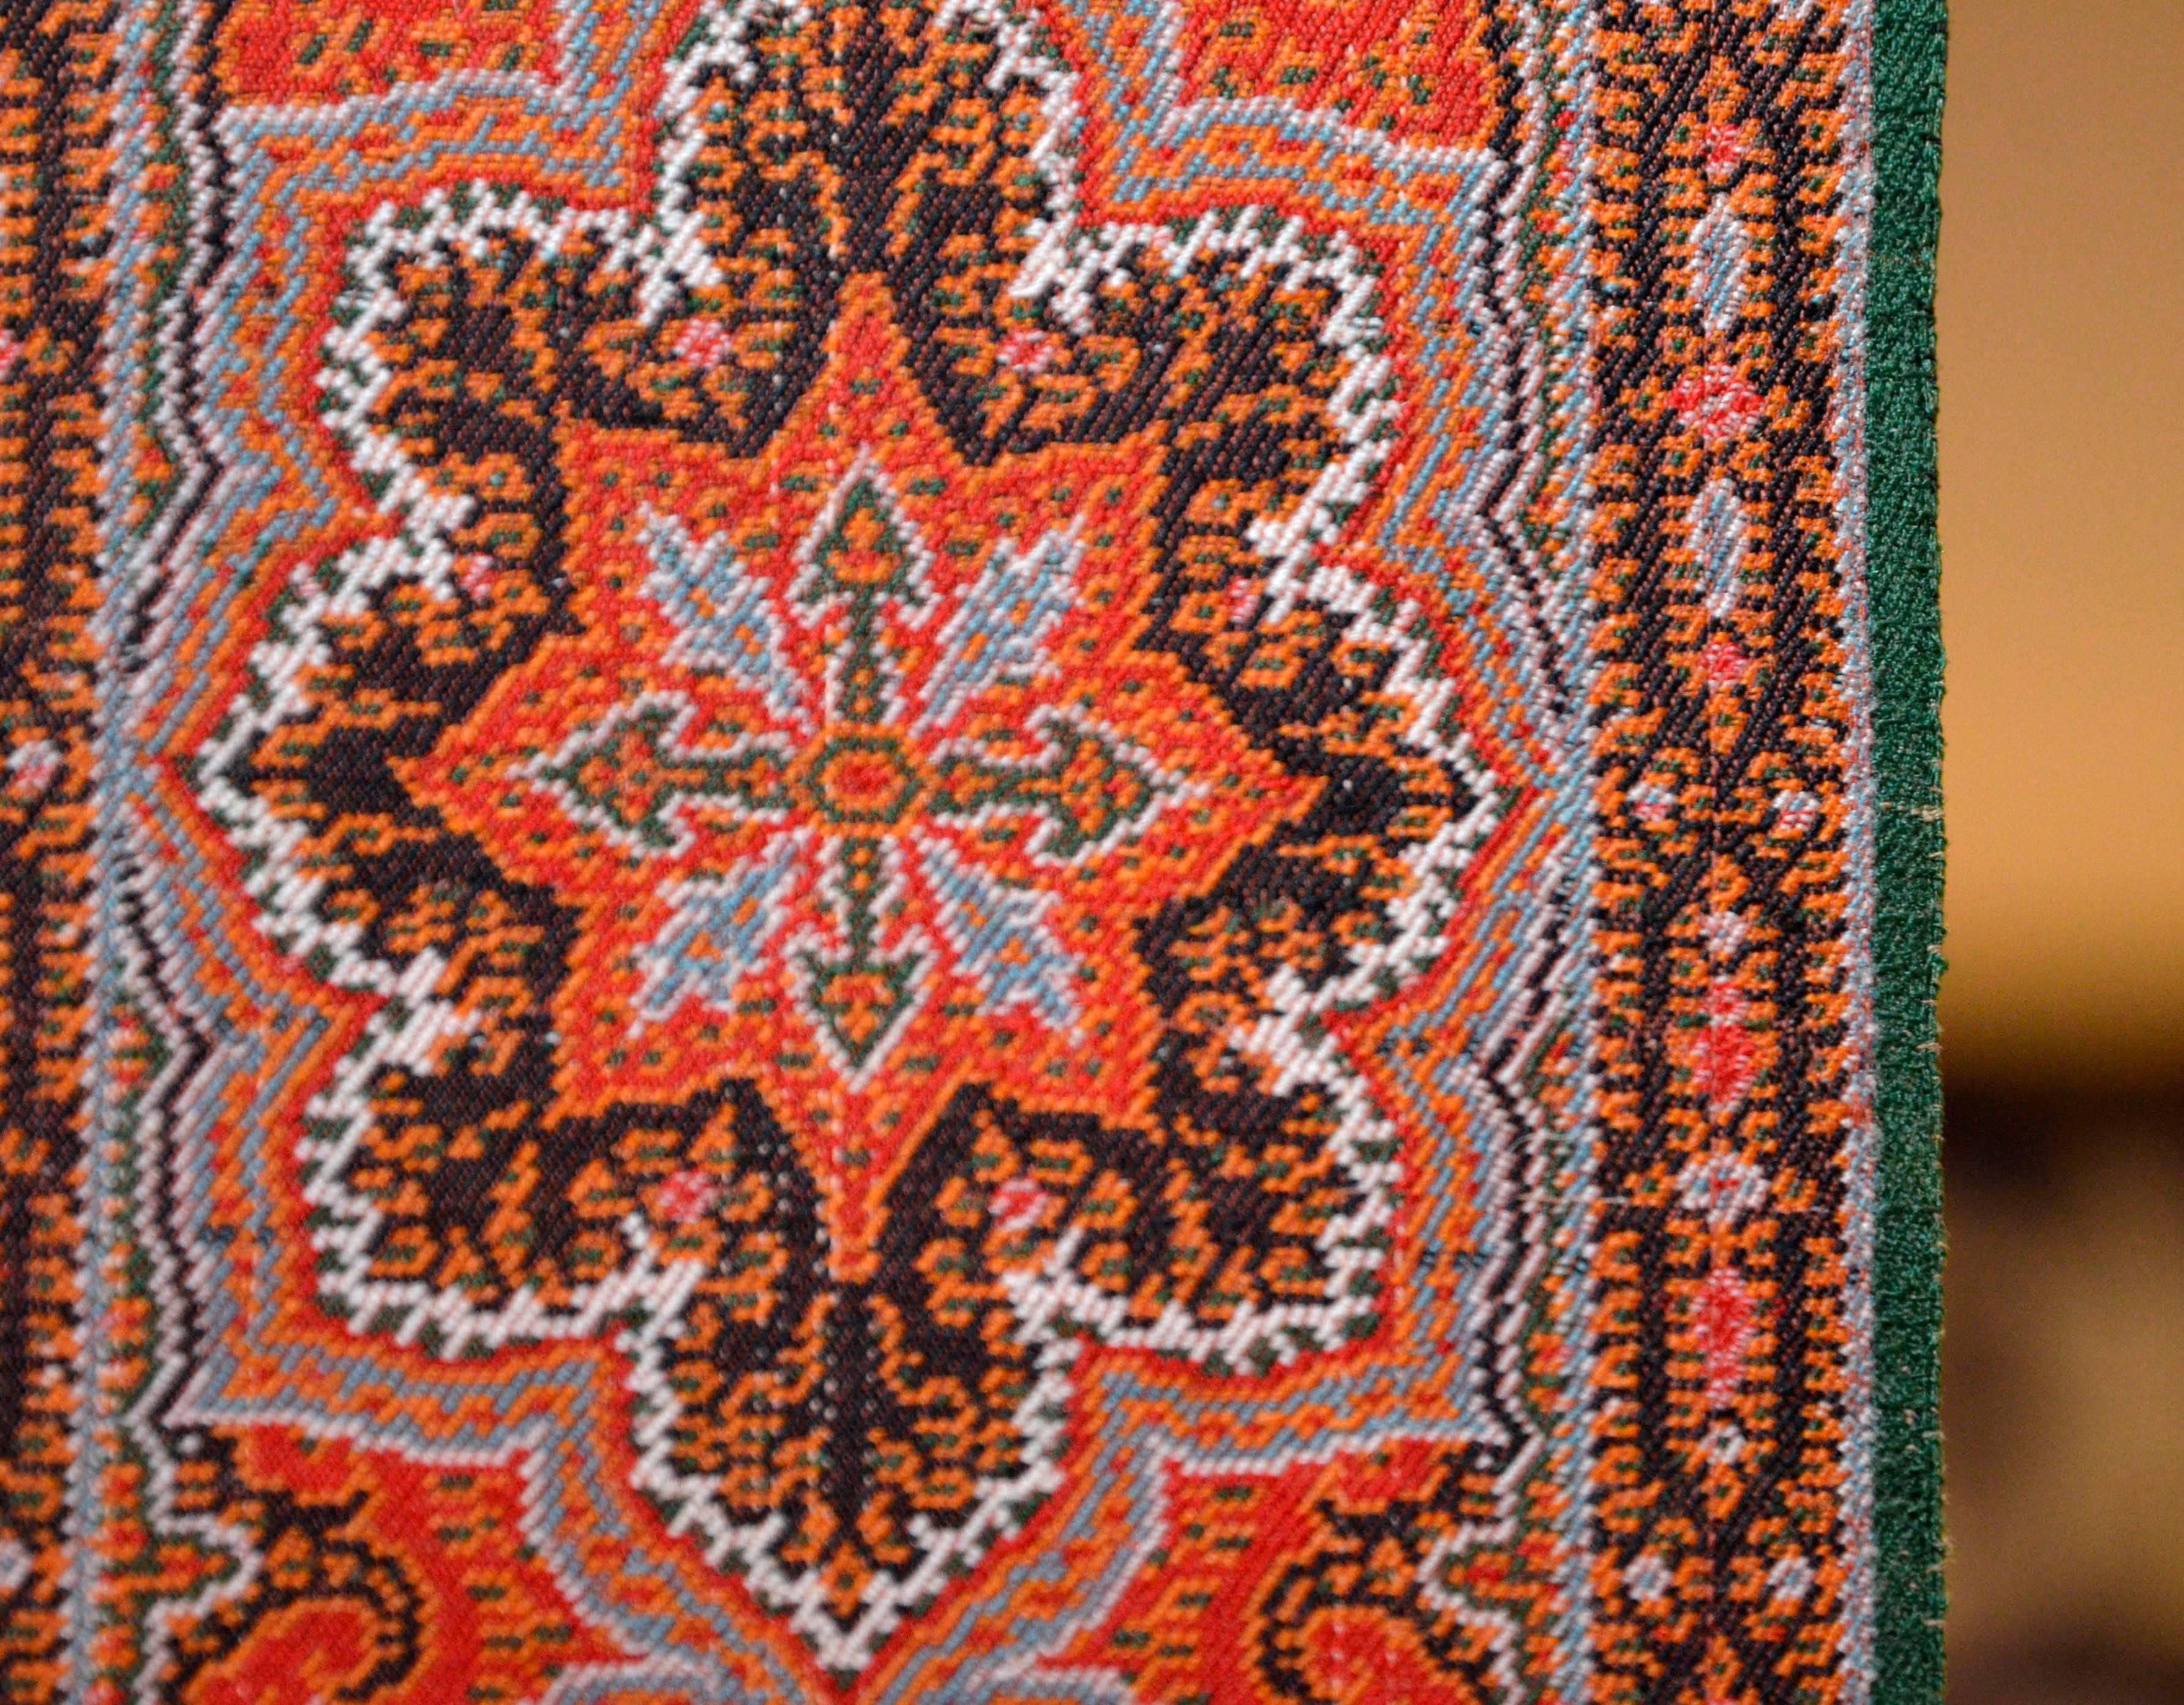 Late 19th Century French Kashmir Paisley Jacquard Shawl For Sale 2